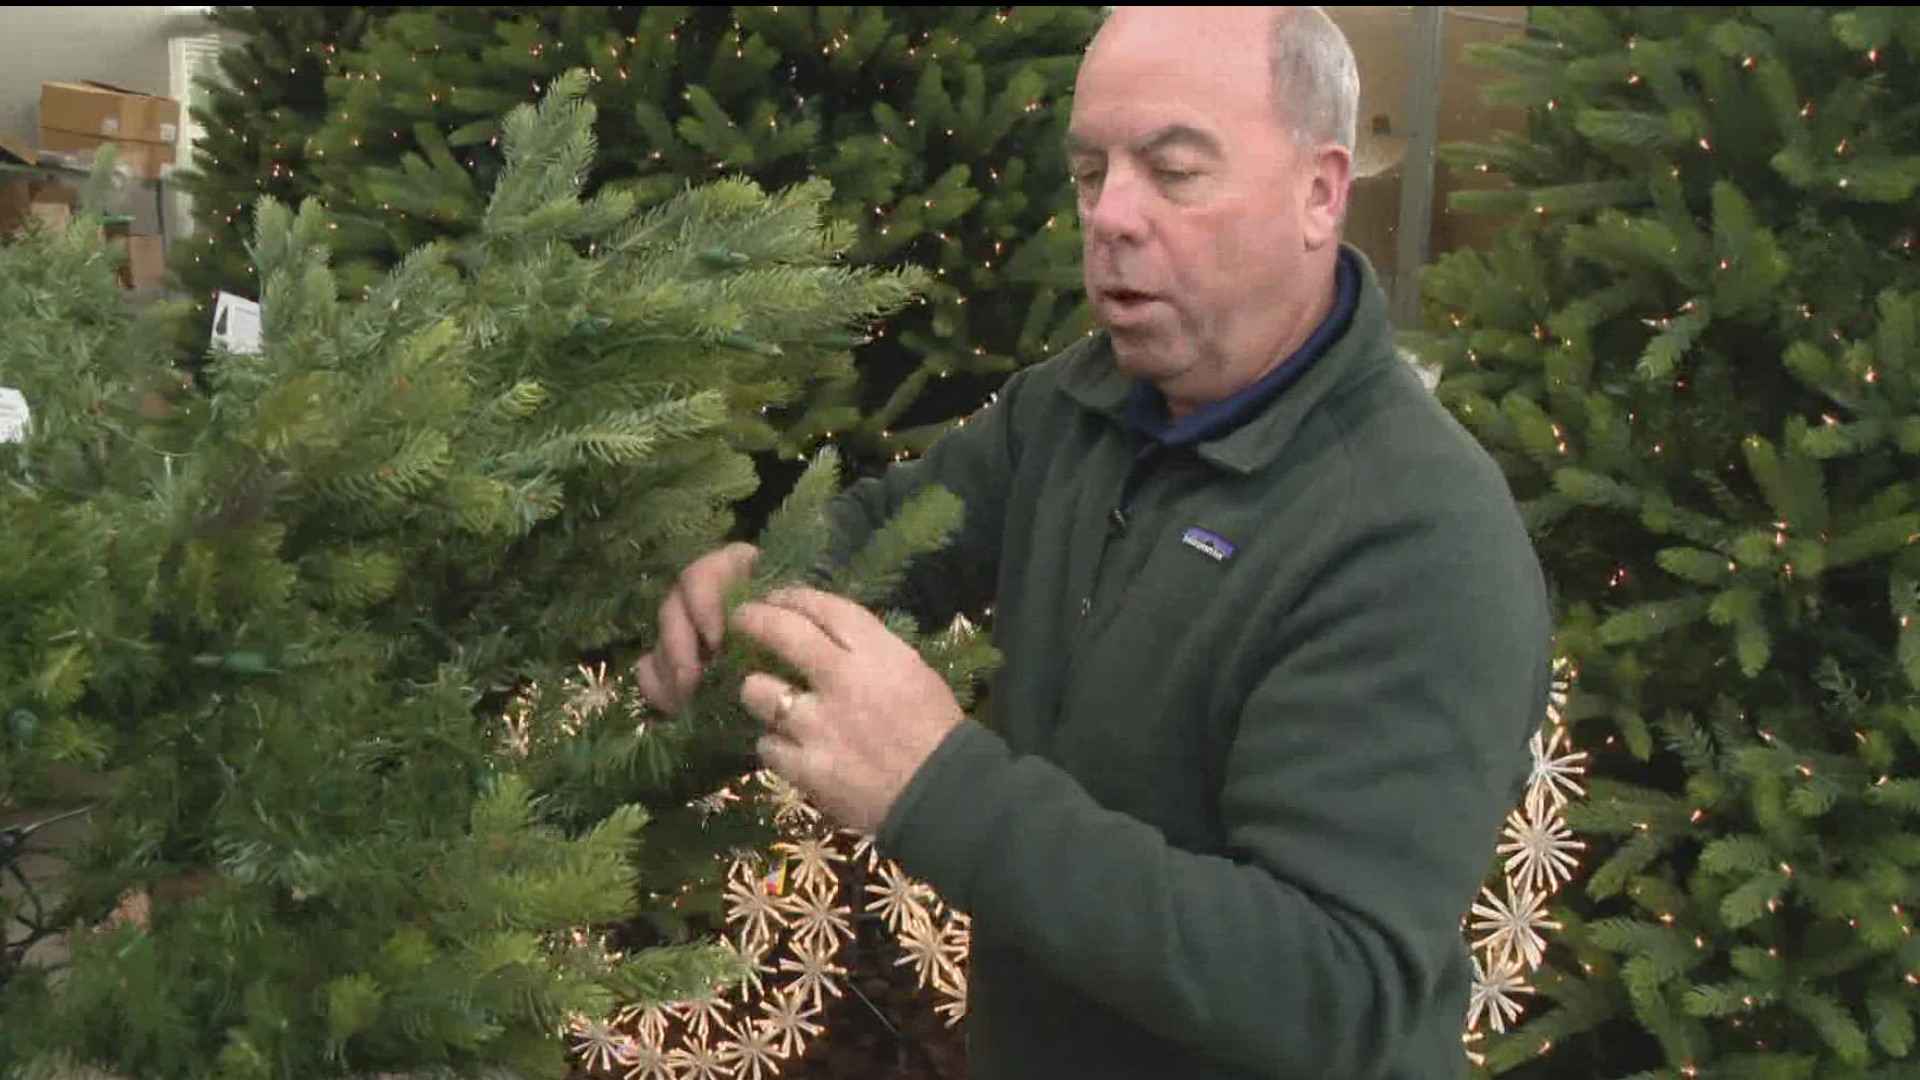 Pat shares his tried and true system for setting up an artificial Christmas tree that will save you a stocking full of aggravation.